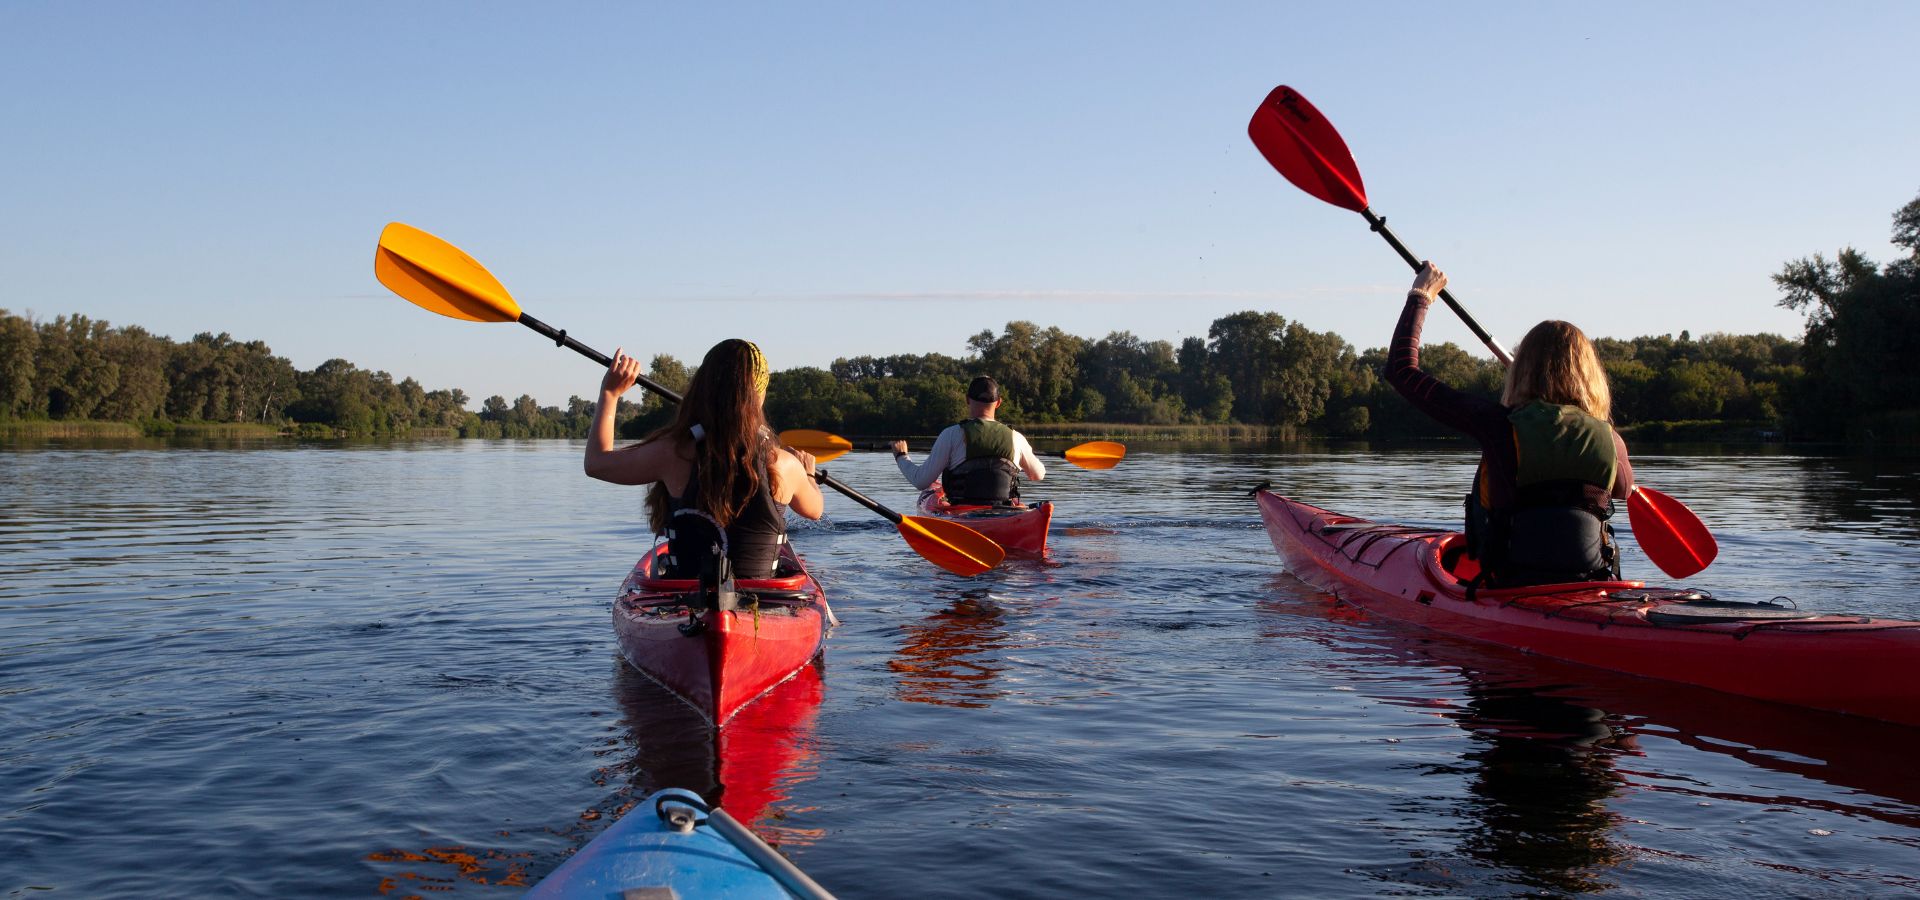 Preparing to Paddle: How You Can Be River Responsible This Year